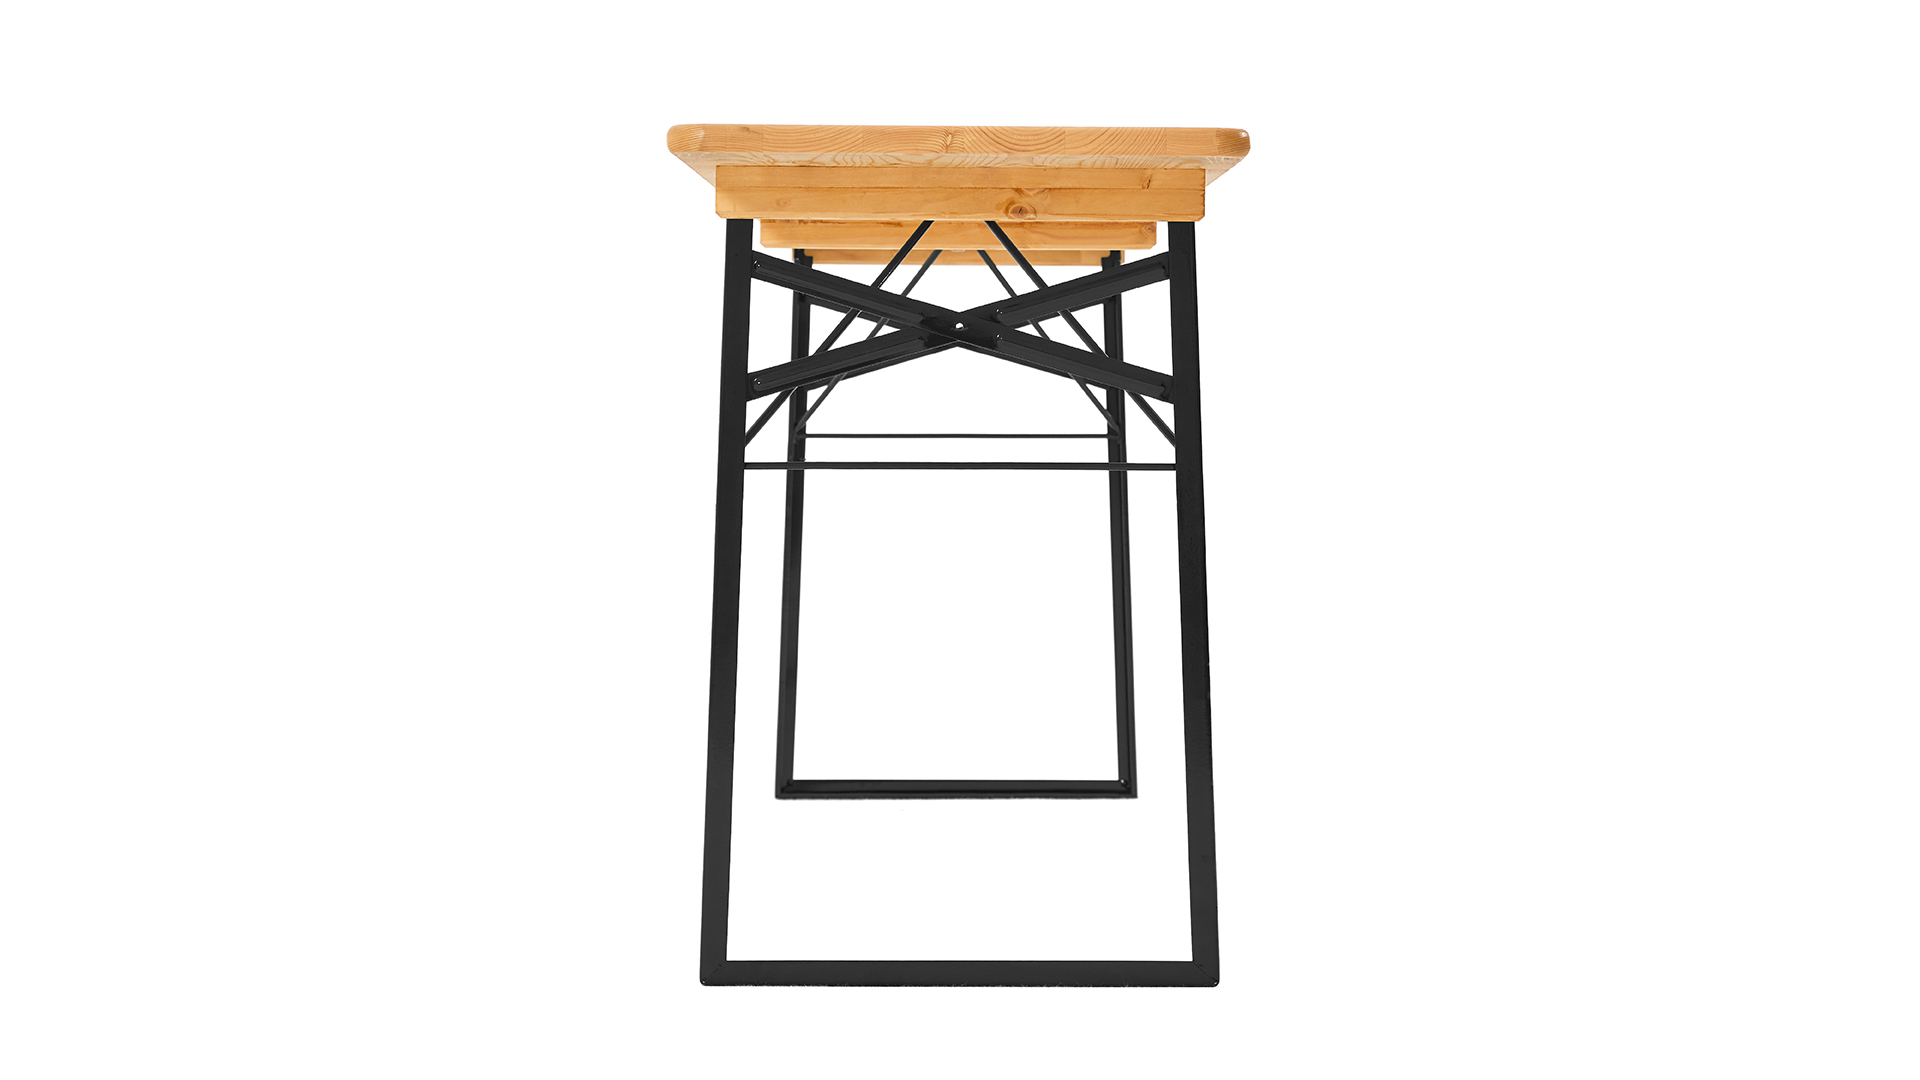 The front view of the classic beer table